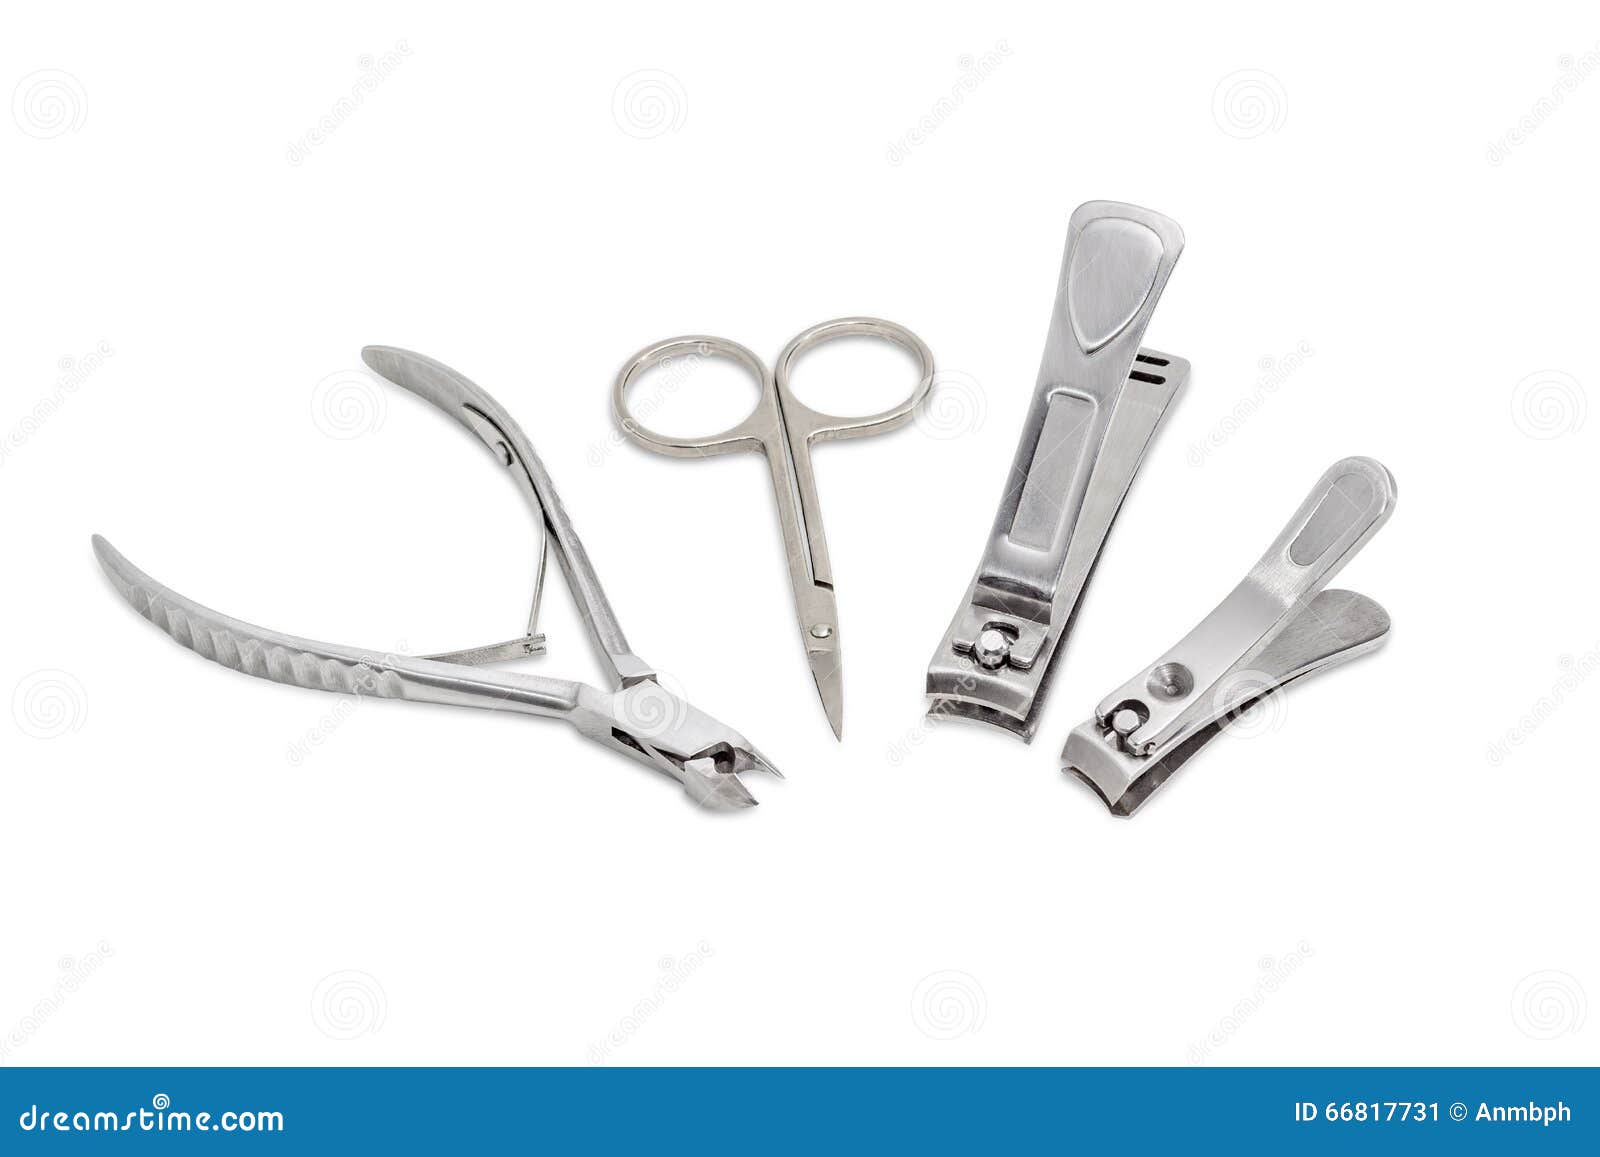 Three Nail Clippers Different Types and Sizes and Nail Scissors Stock ...